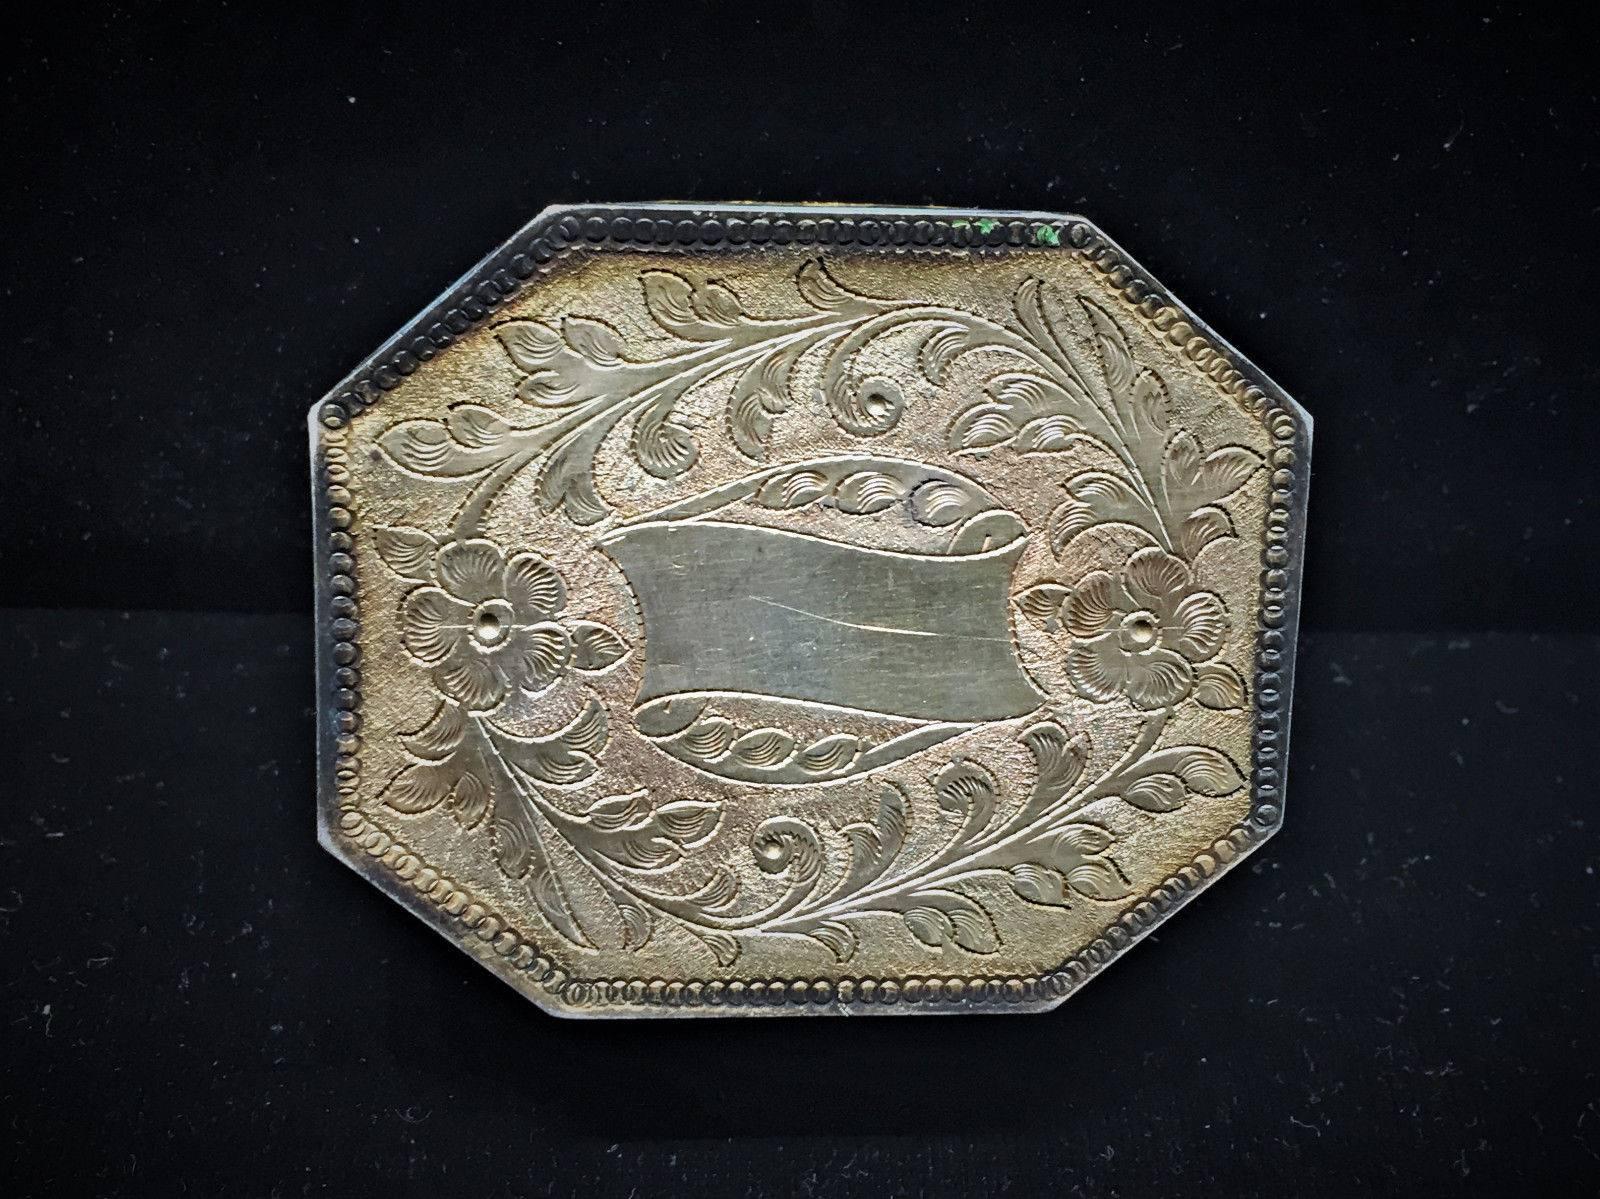 Antique Indian Enameled Silver Snuffbox with Hunting Scenes, circa 1890s 4